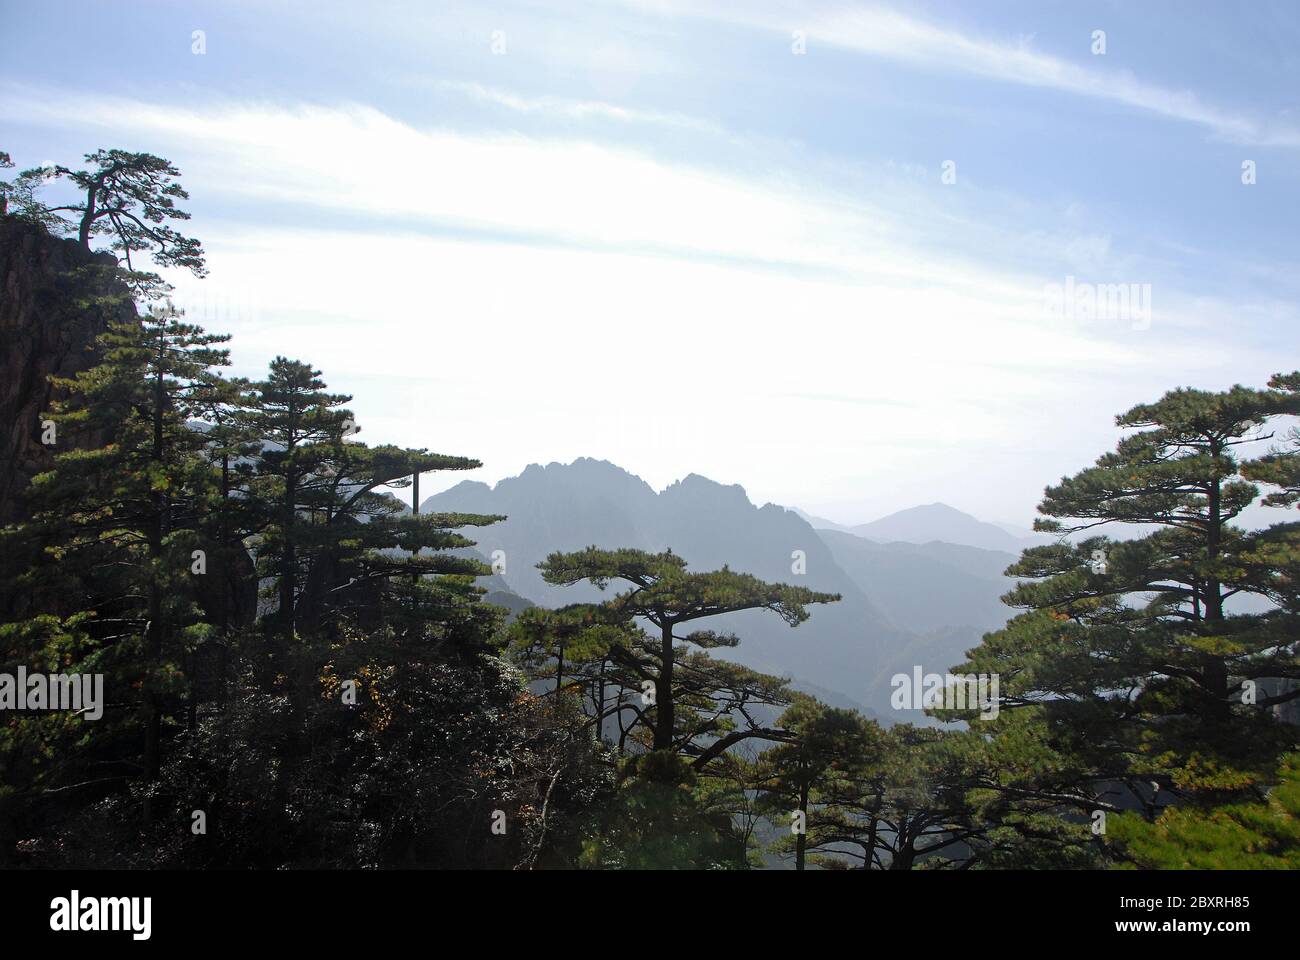 Huangshan Mountain in Anhui Province, China. Scenic panorama looking over pine trees in the West Sea or Xi Hai canyon on Huangshan Stock Photo